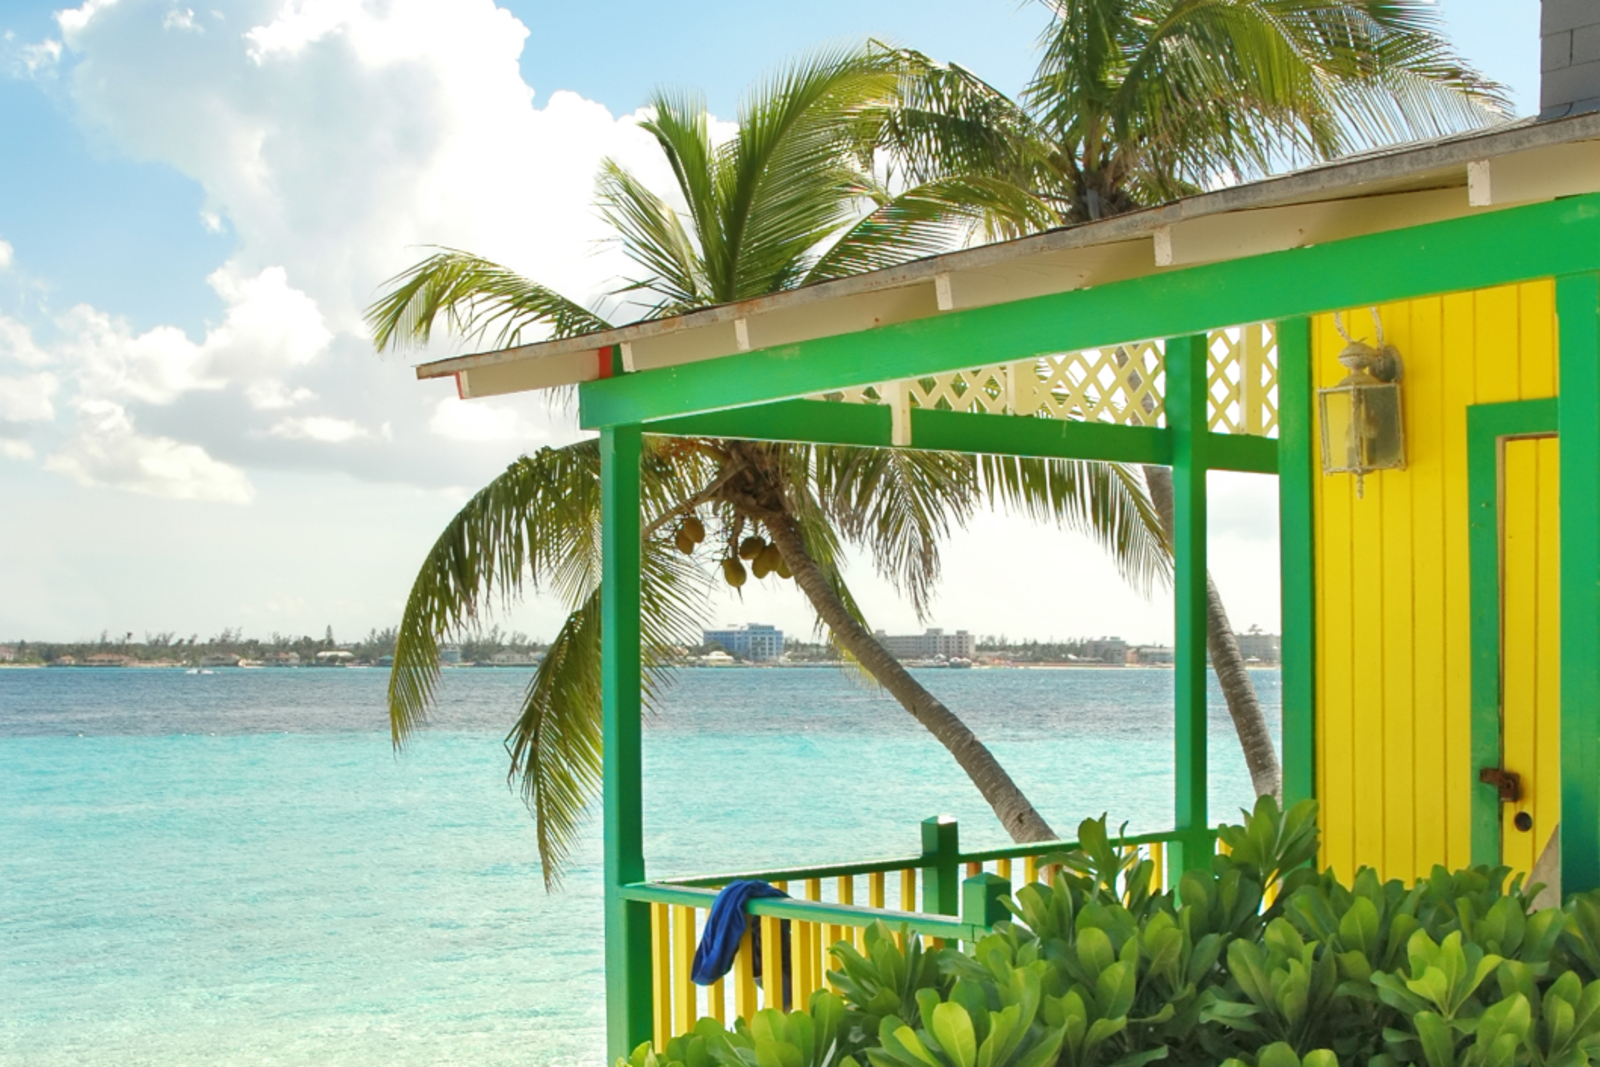 Nassau is one of the best spring break destinations for families